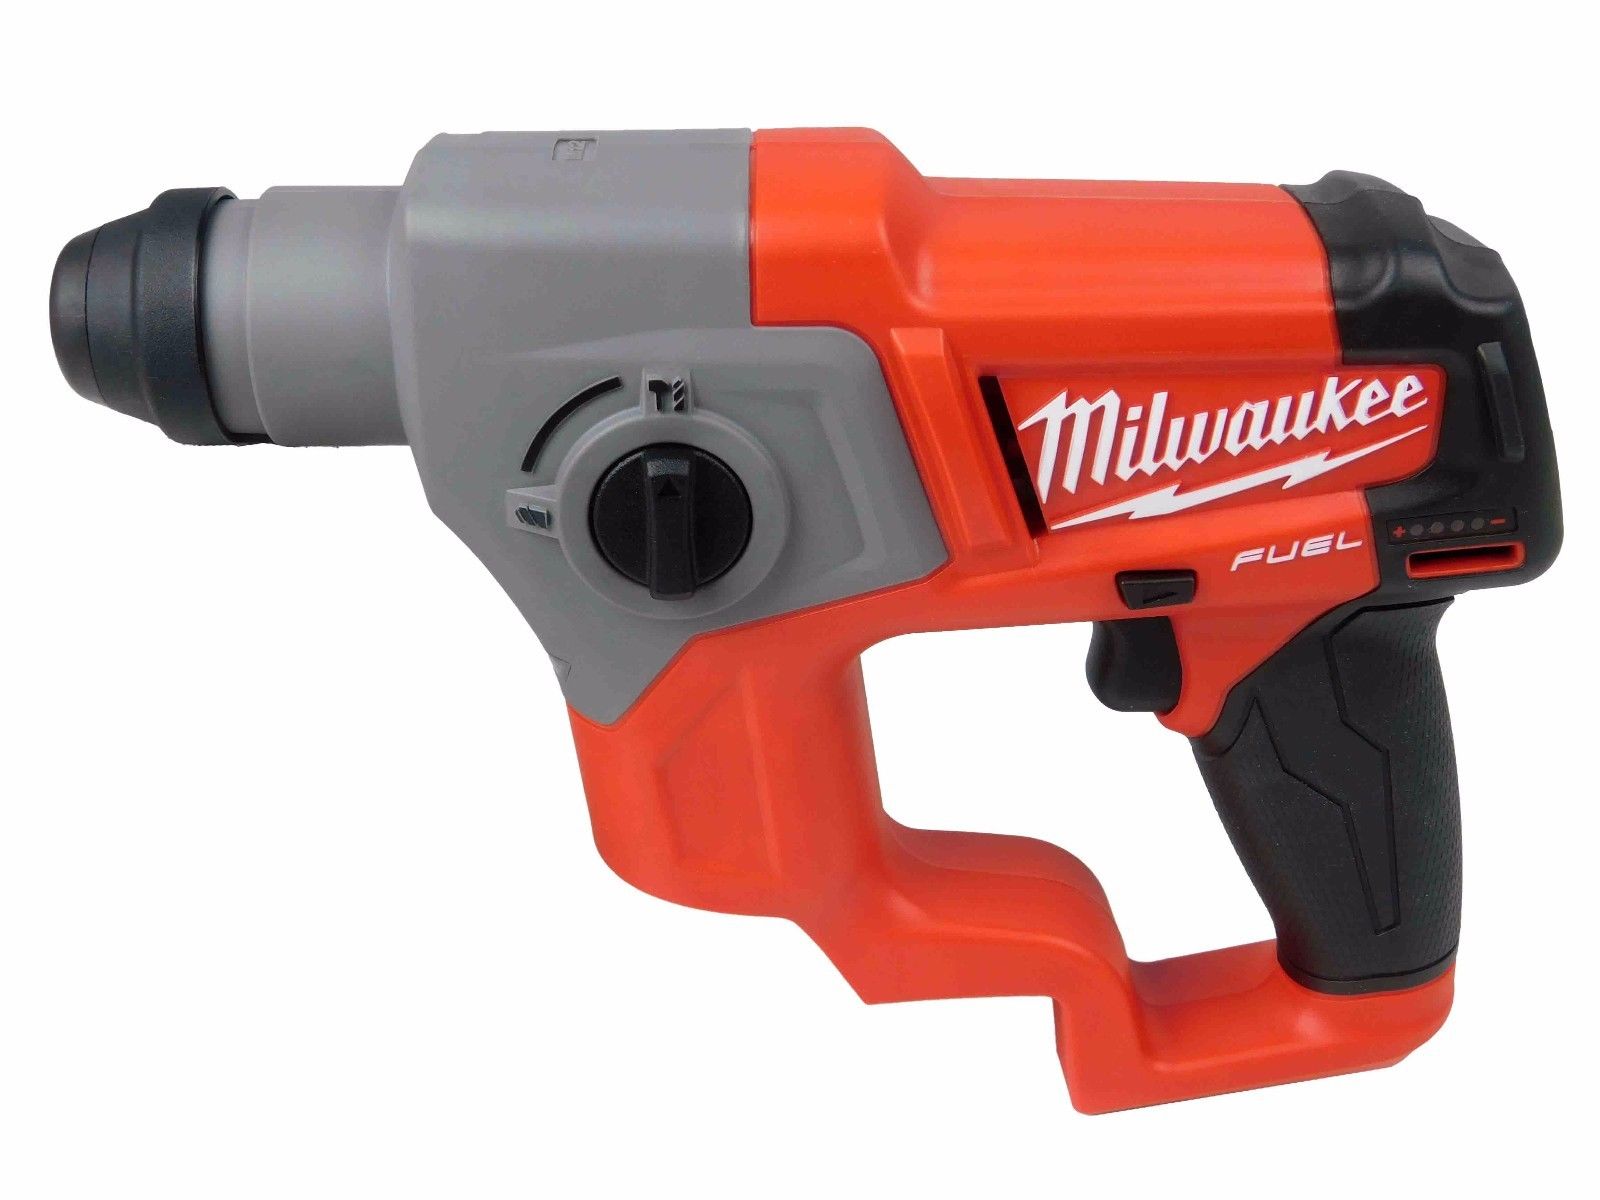 Milwaukee 2416-20 M12 FUEL 5/8 SDS Plus Rotary Hammer (Tool Only)